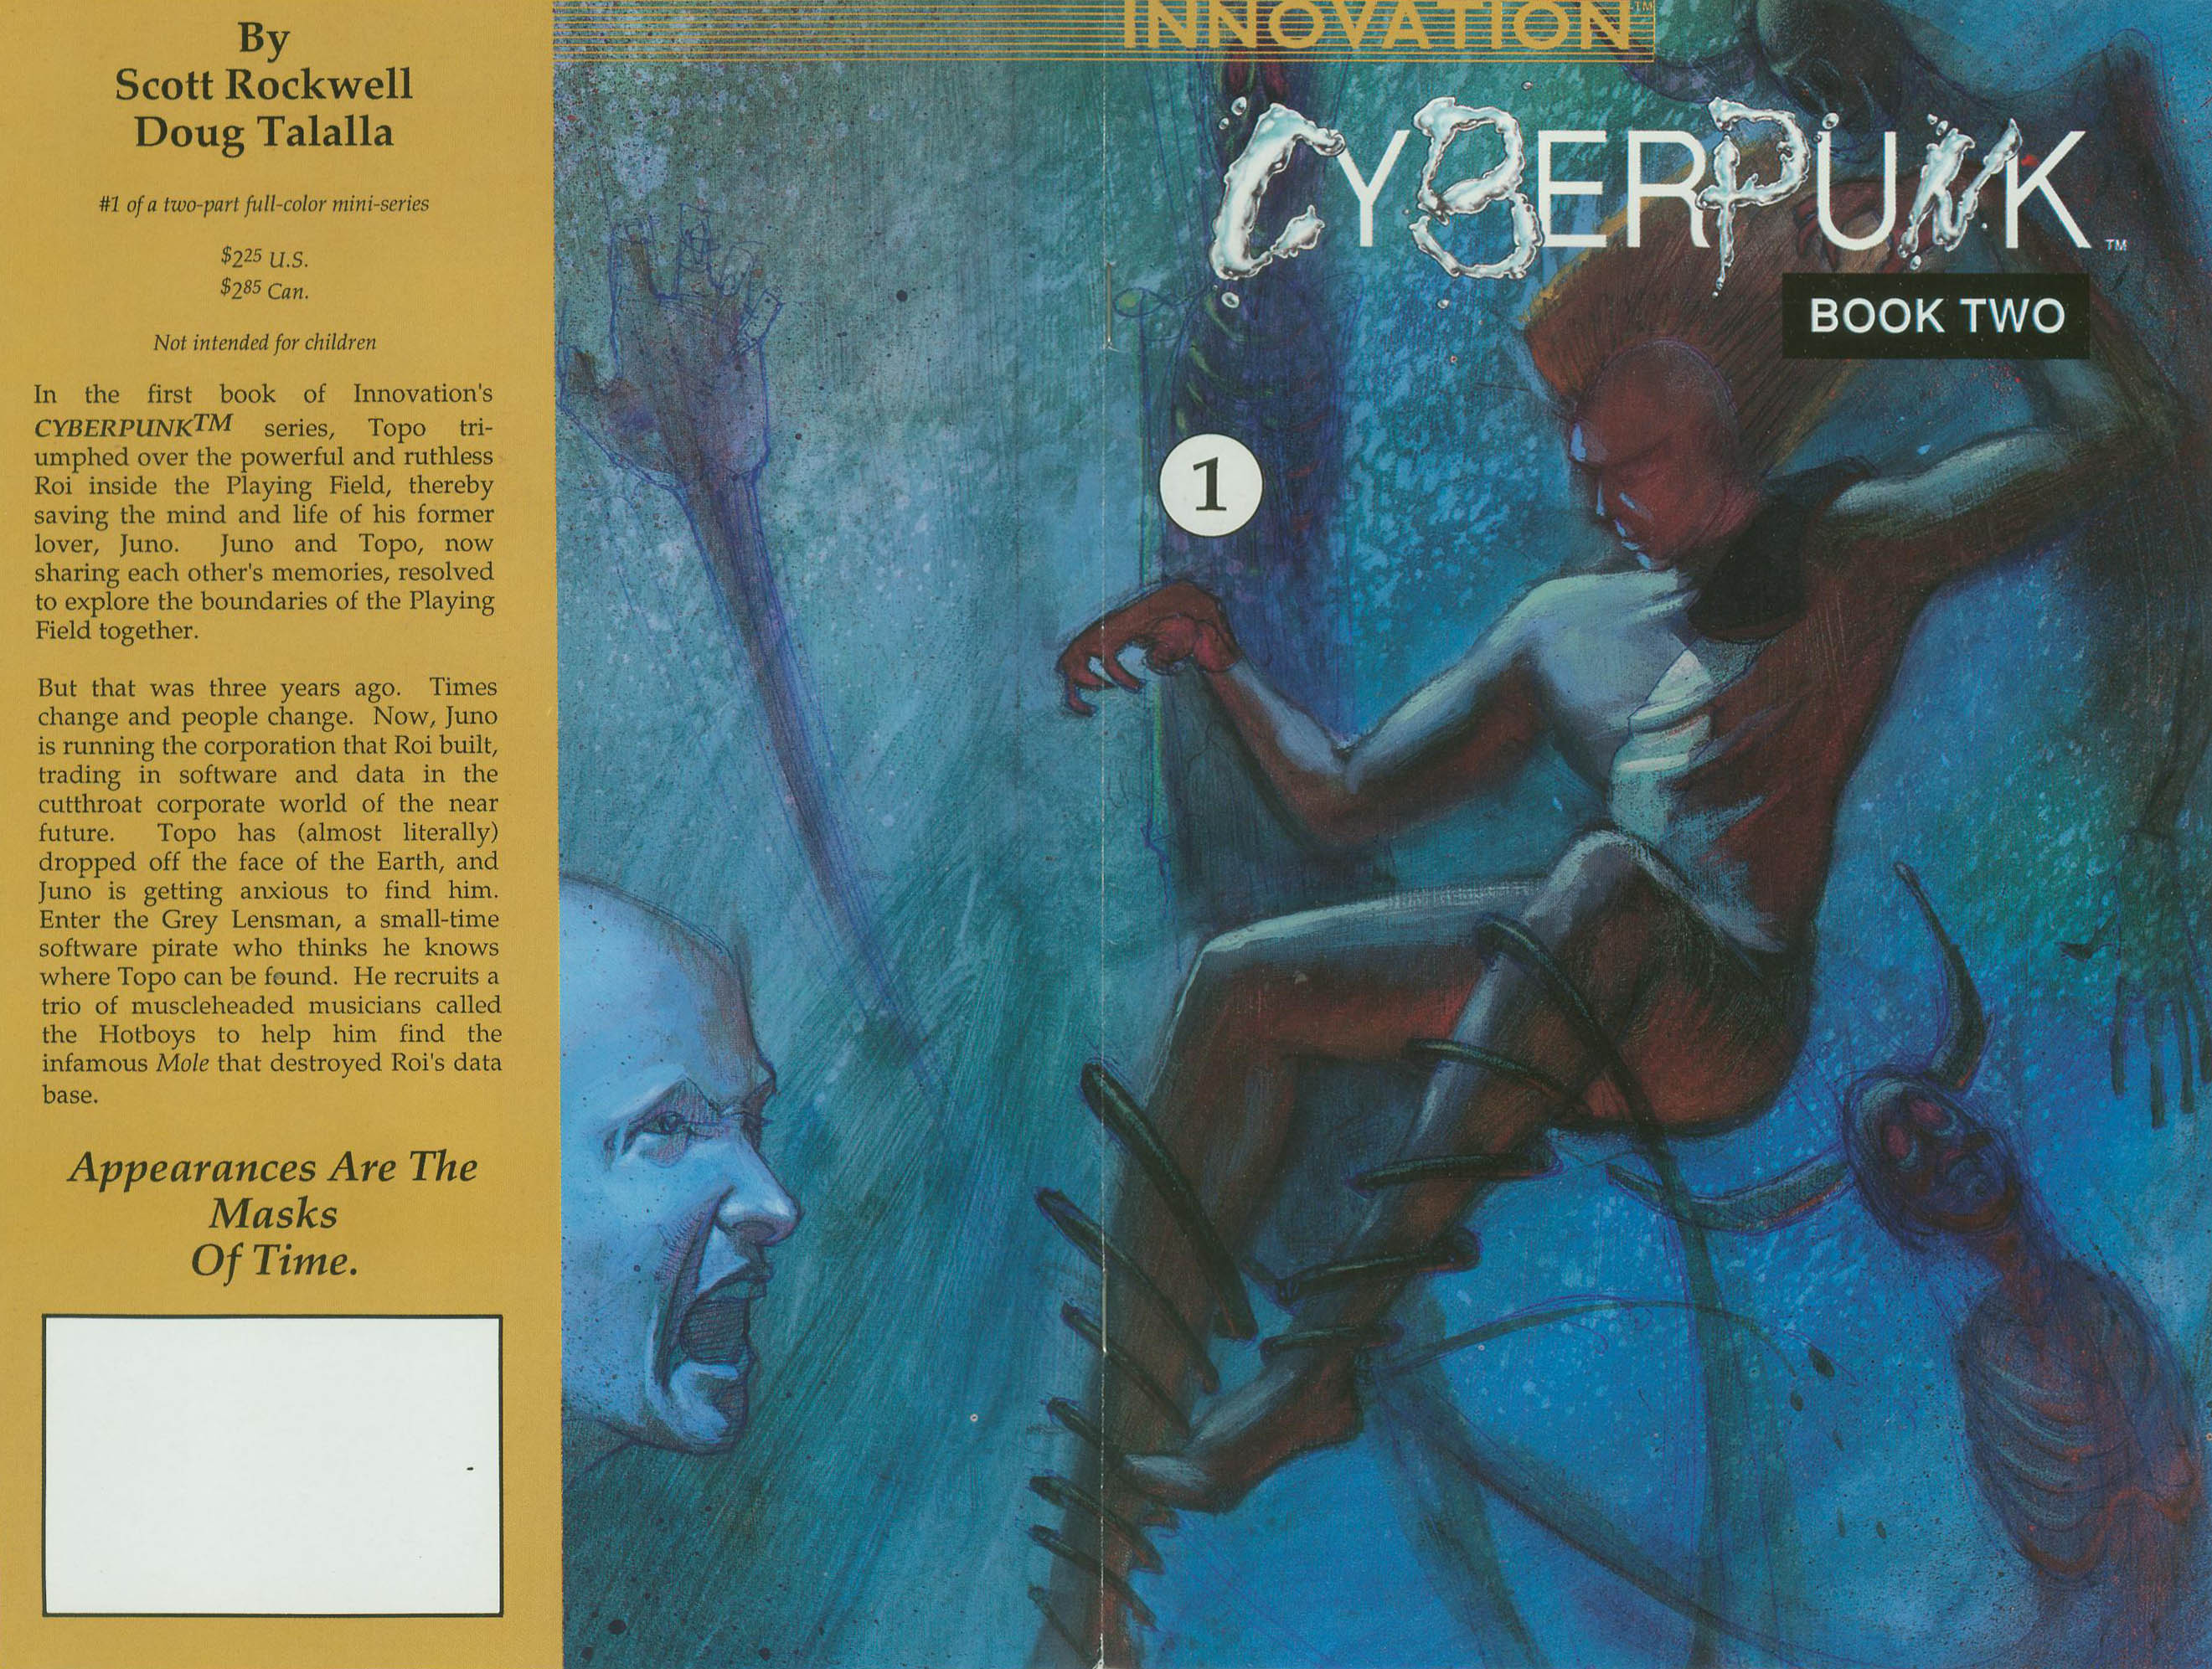 Read online Cyberpunk Book Two comic -  Issue #1 - 1